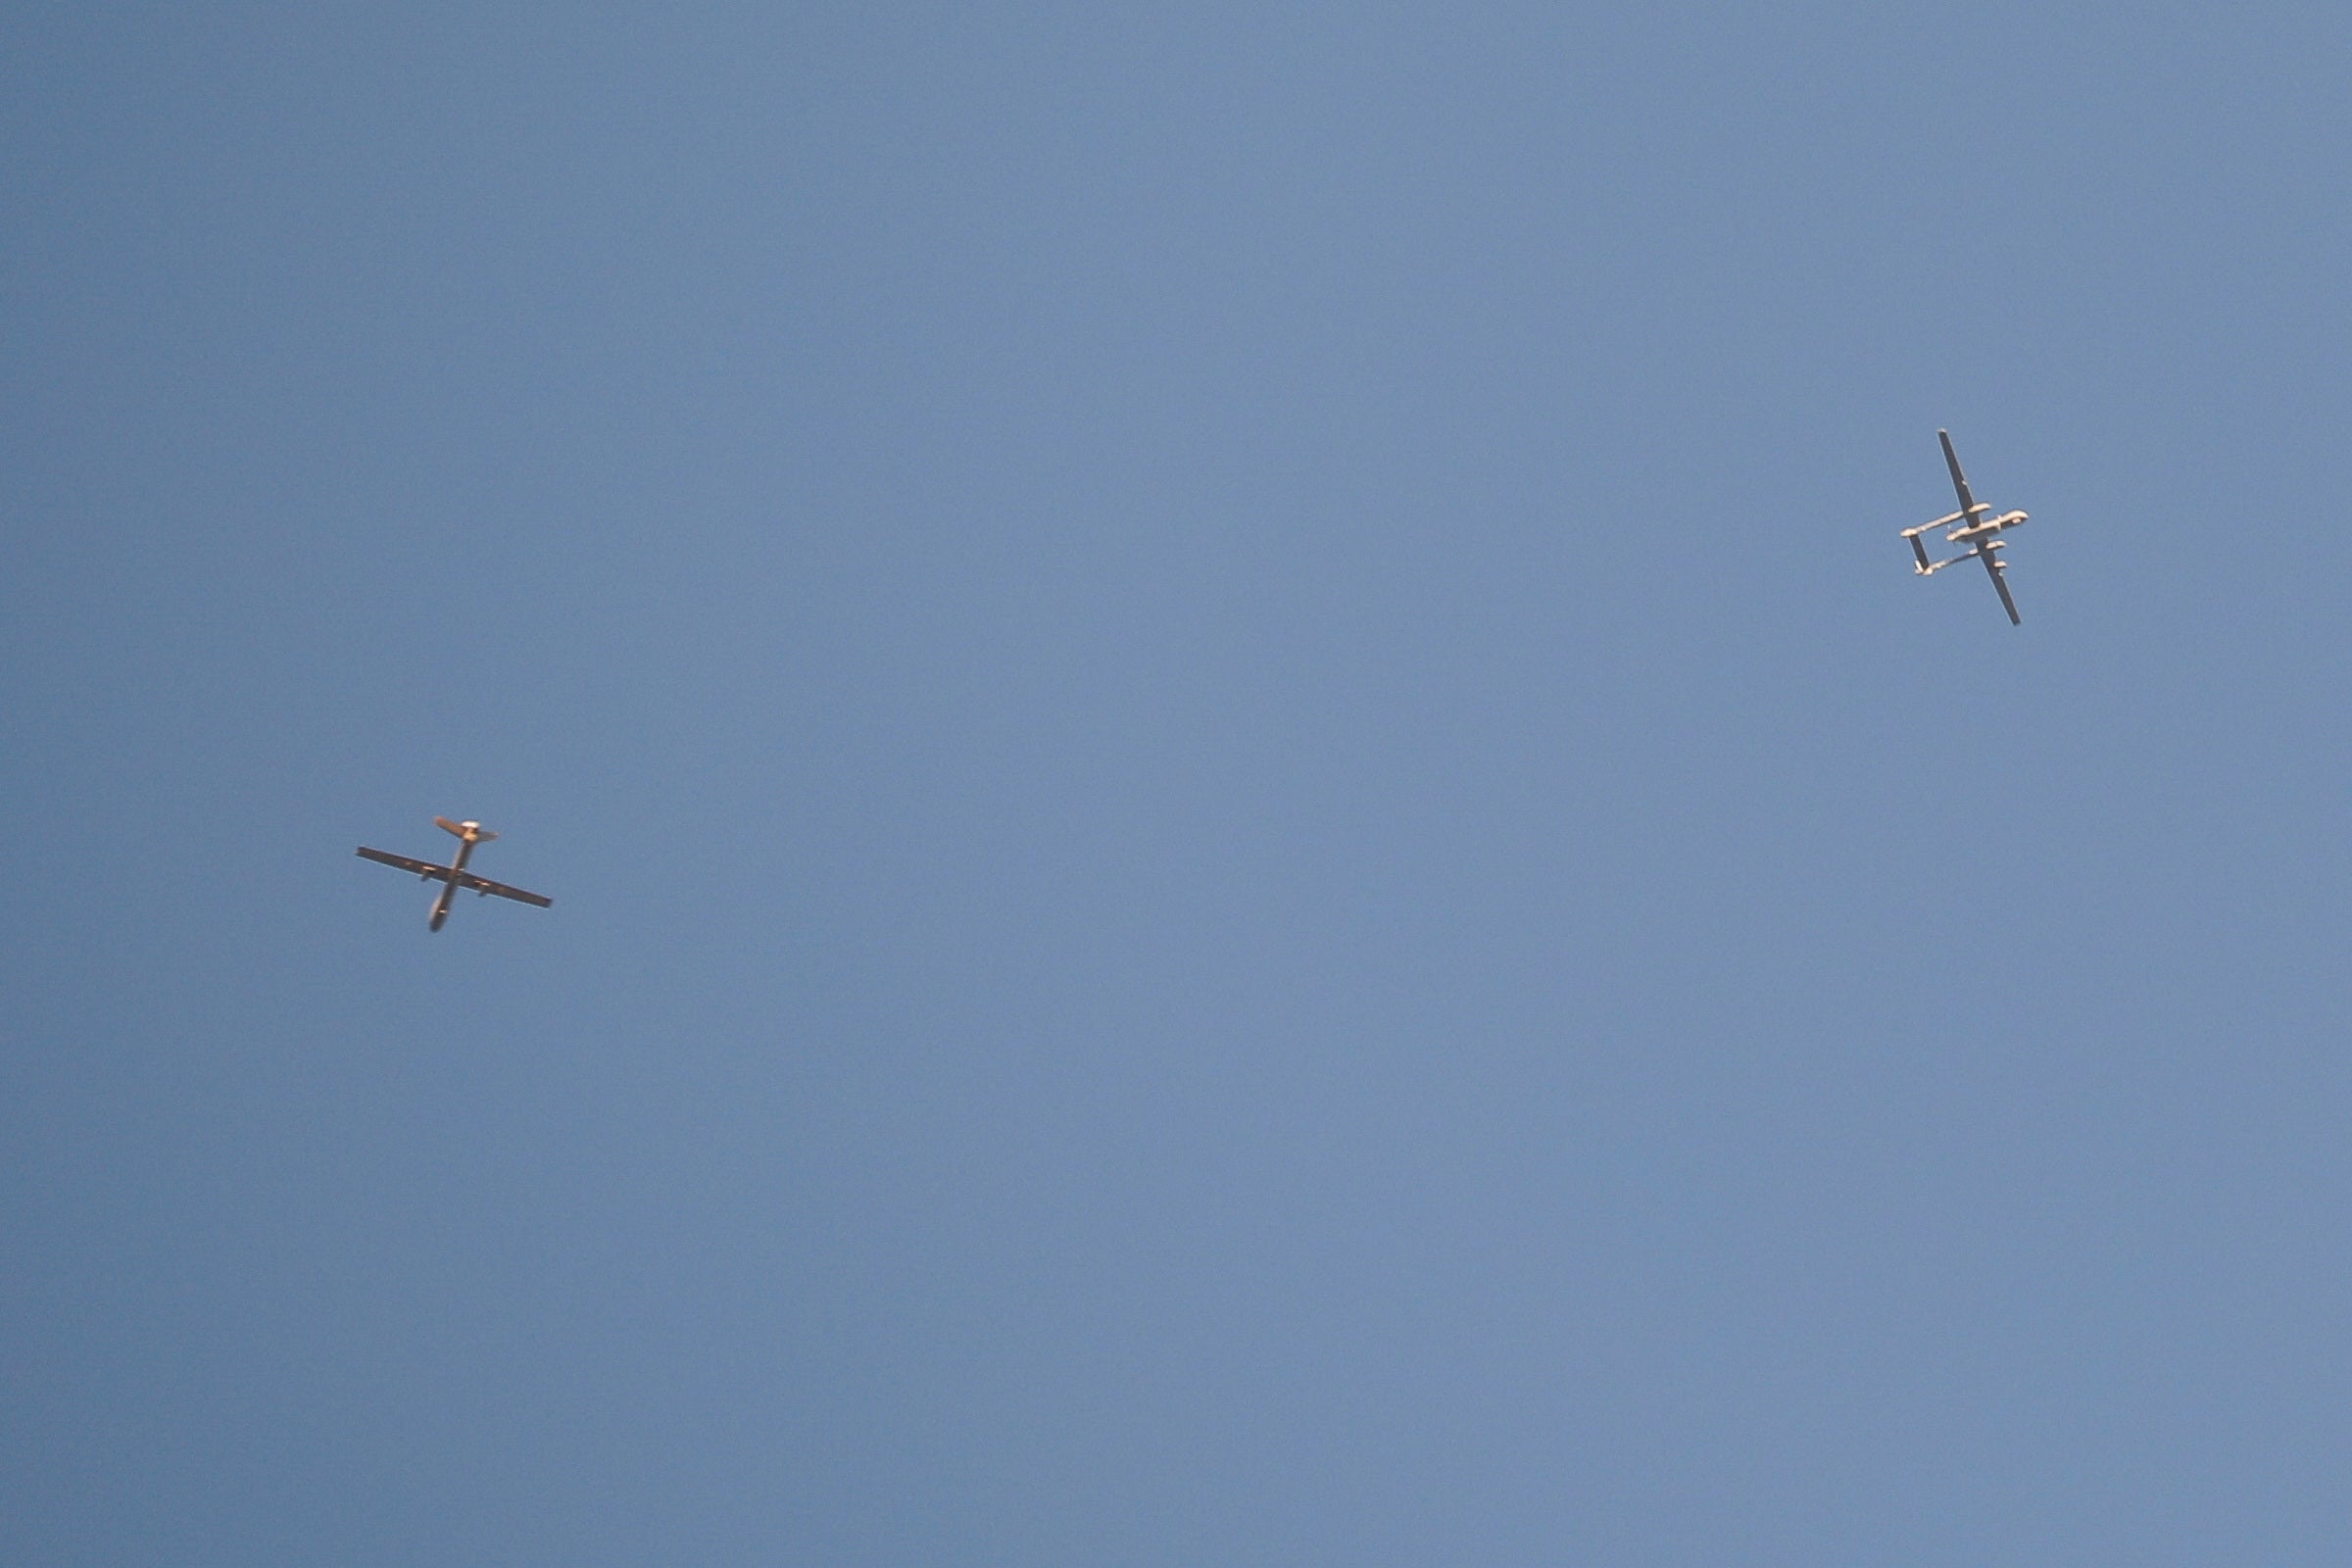 Israeli drones fly over Jenin during the military operation